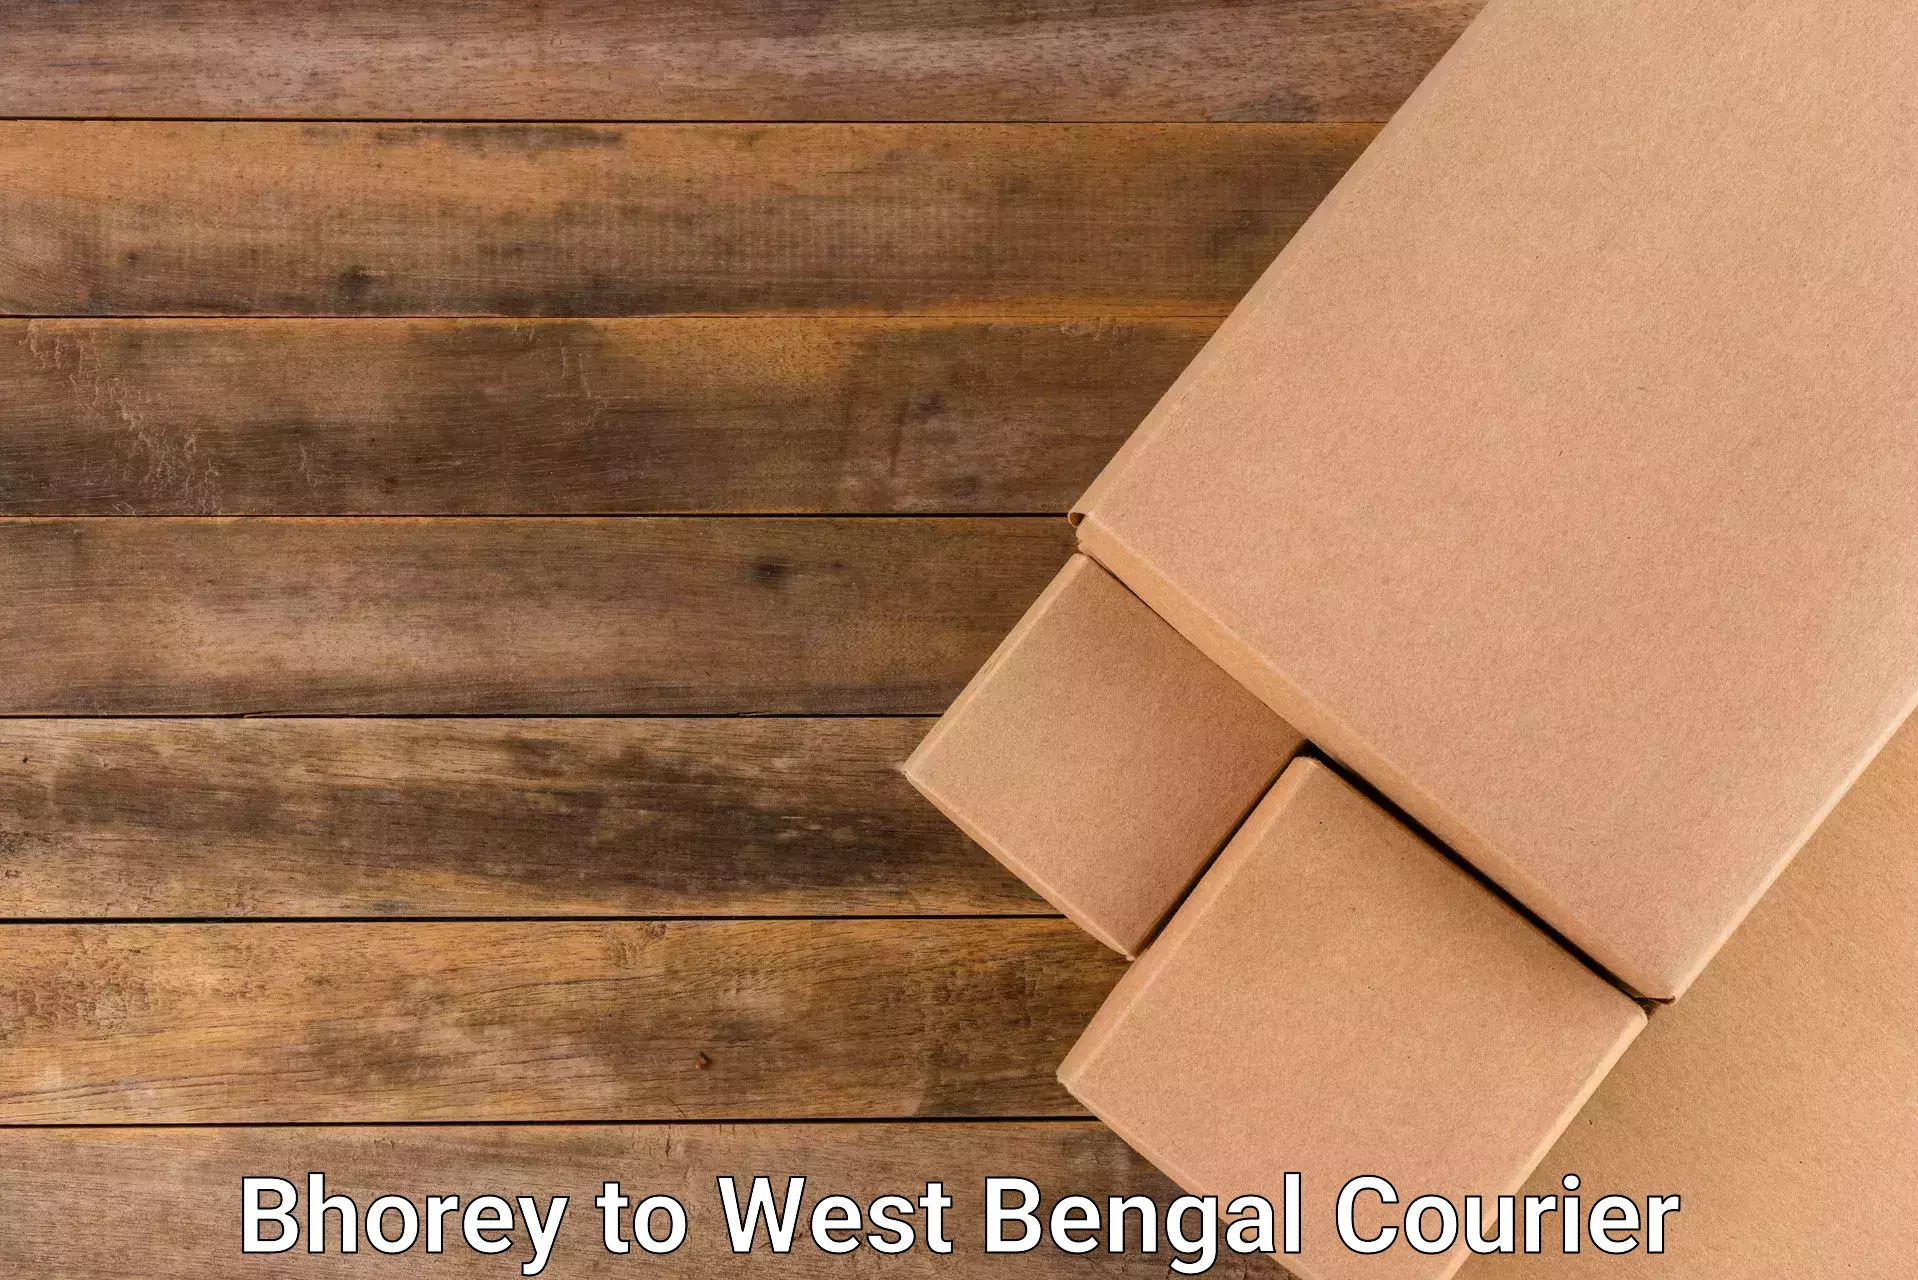 Courier insurance in Bhorey to Berhampore